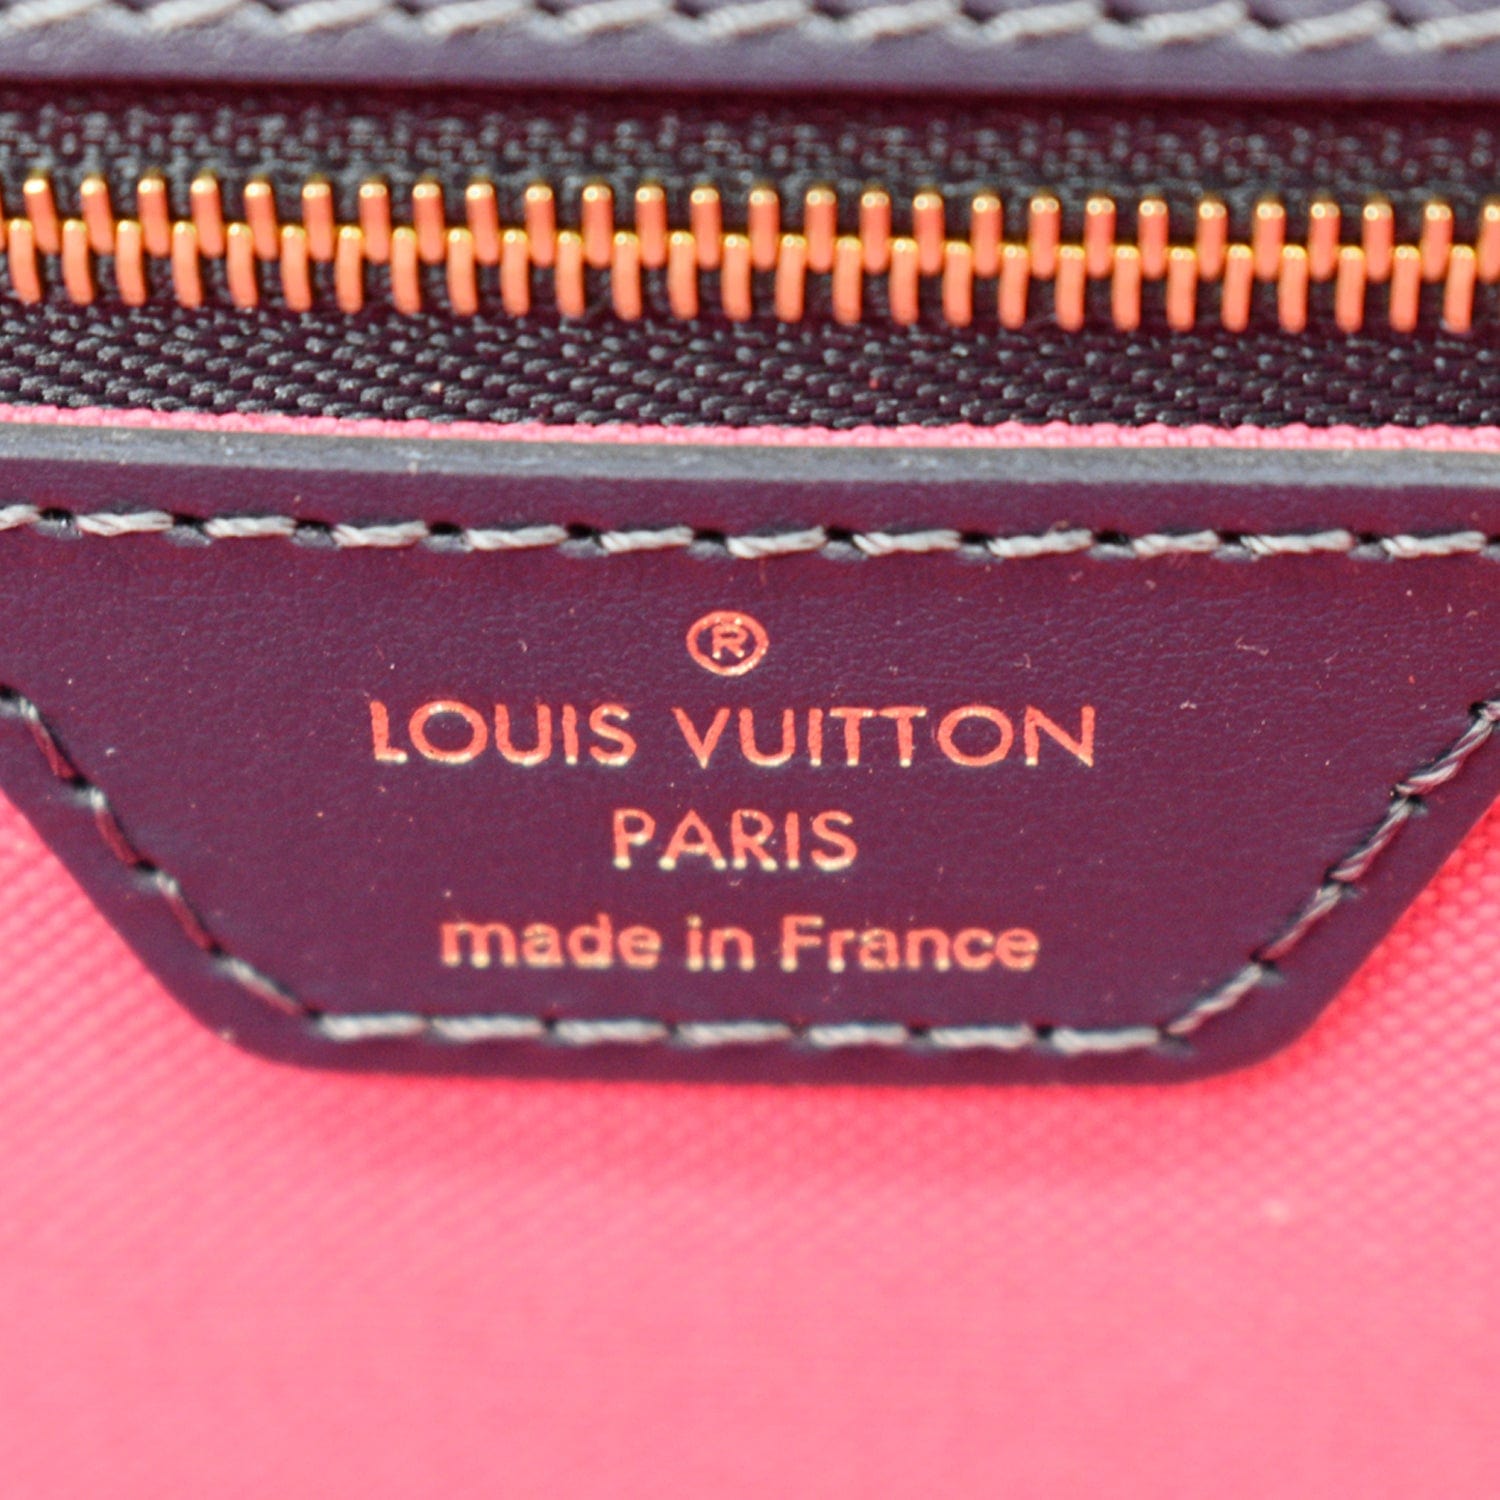 louis vuitton made in france stamp